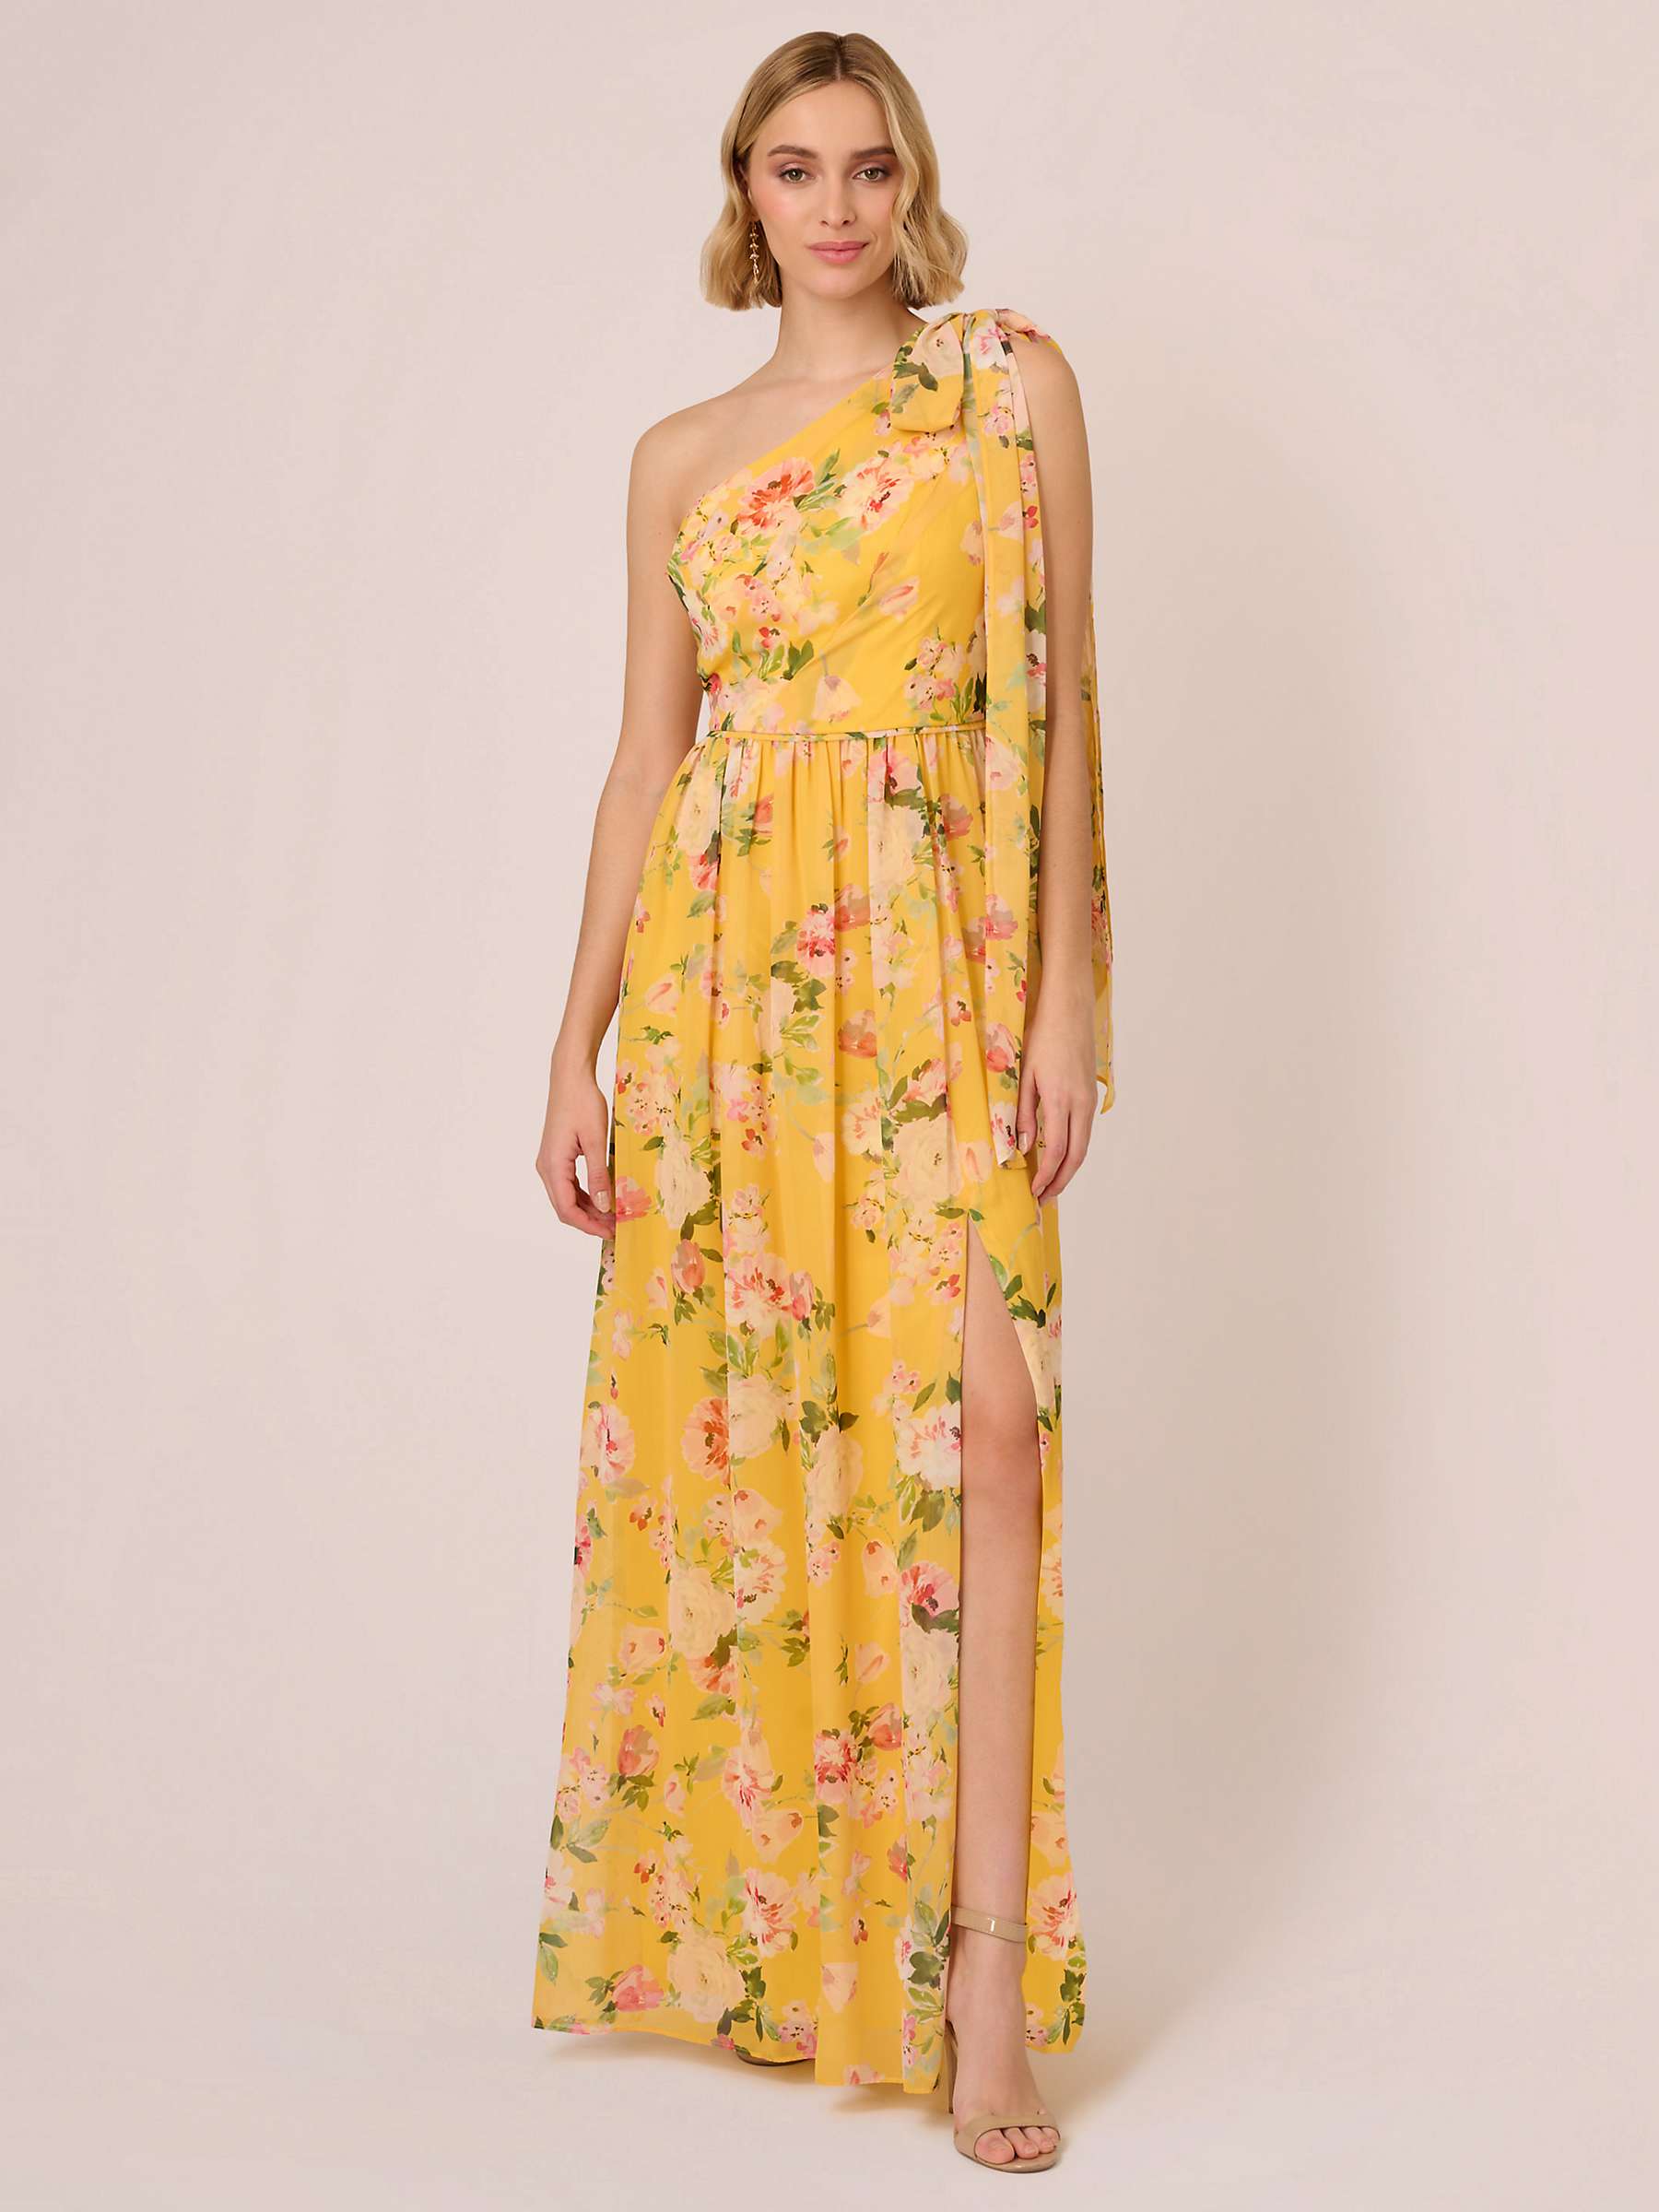 Buy Adrianna Papell One Shoulder Floral Chiffon Maxi Dress, Yellow/Multi Online at johnlewis.com